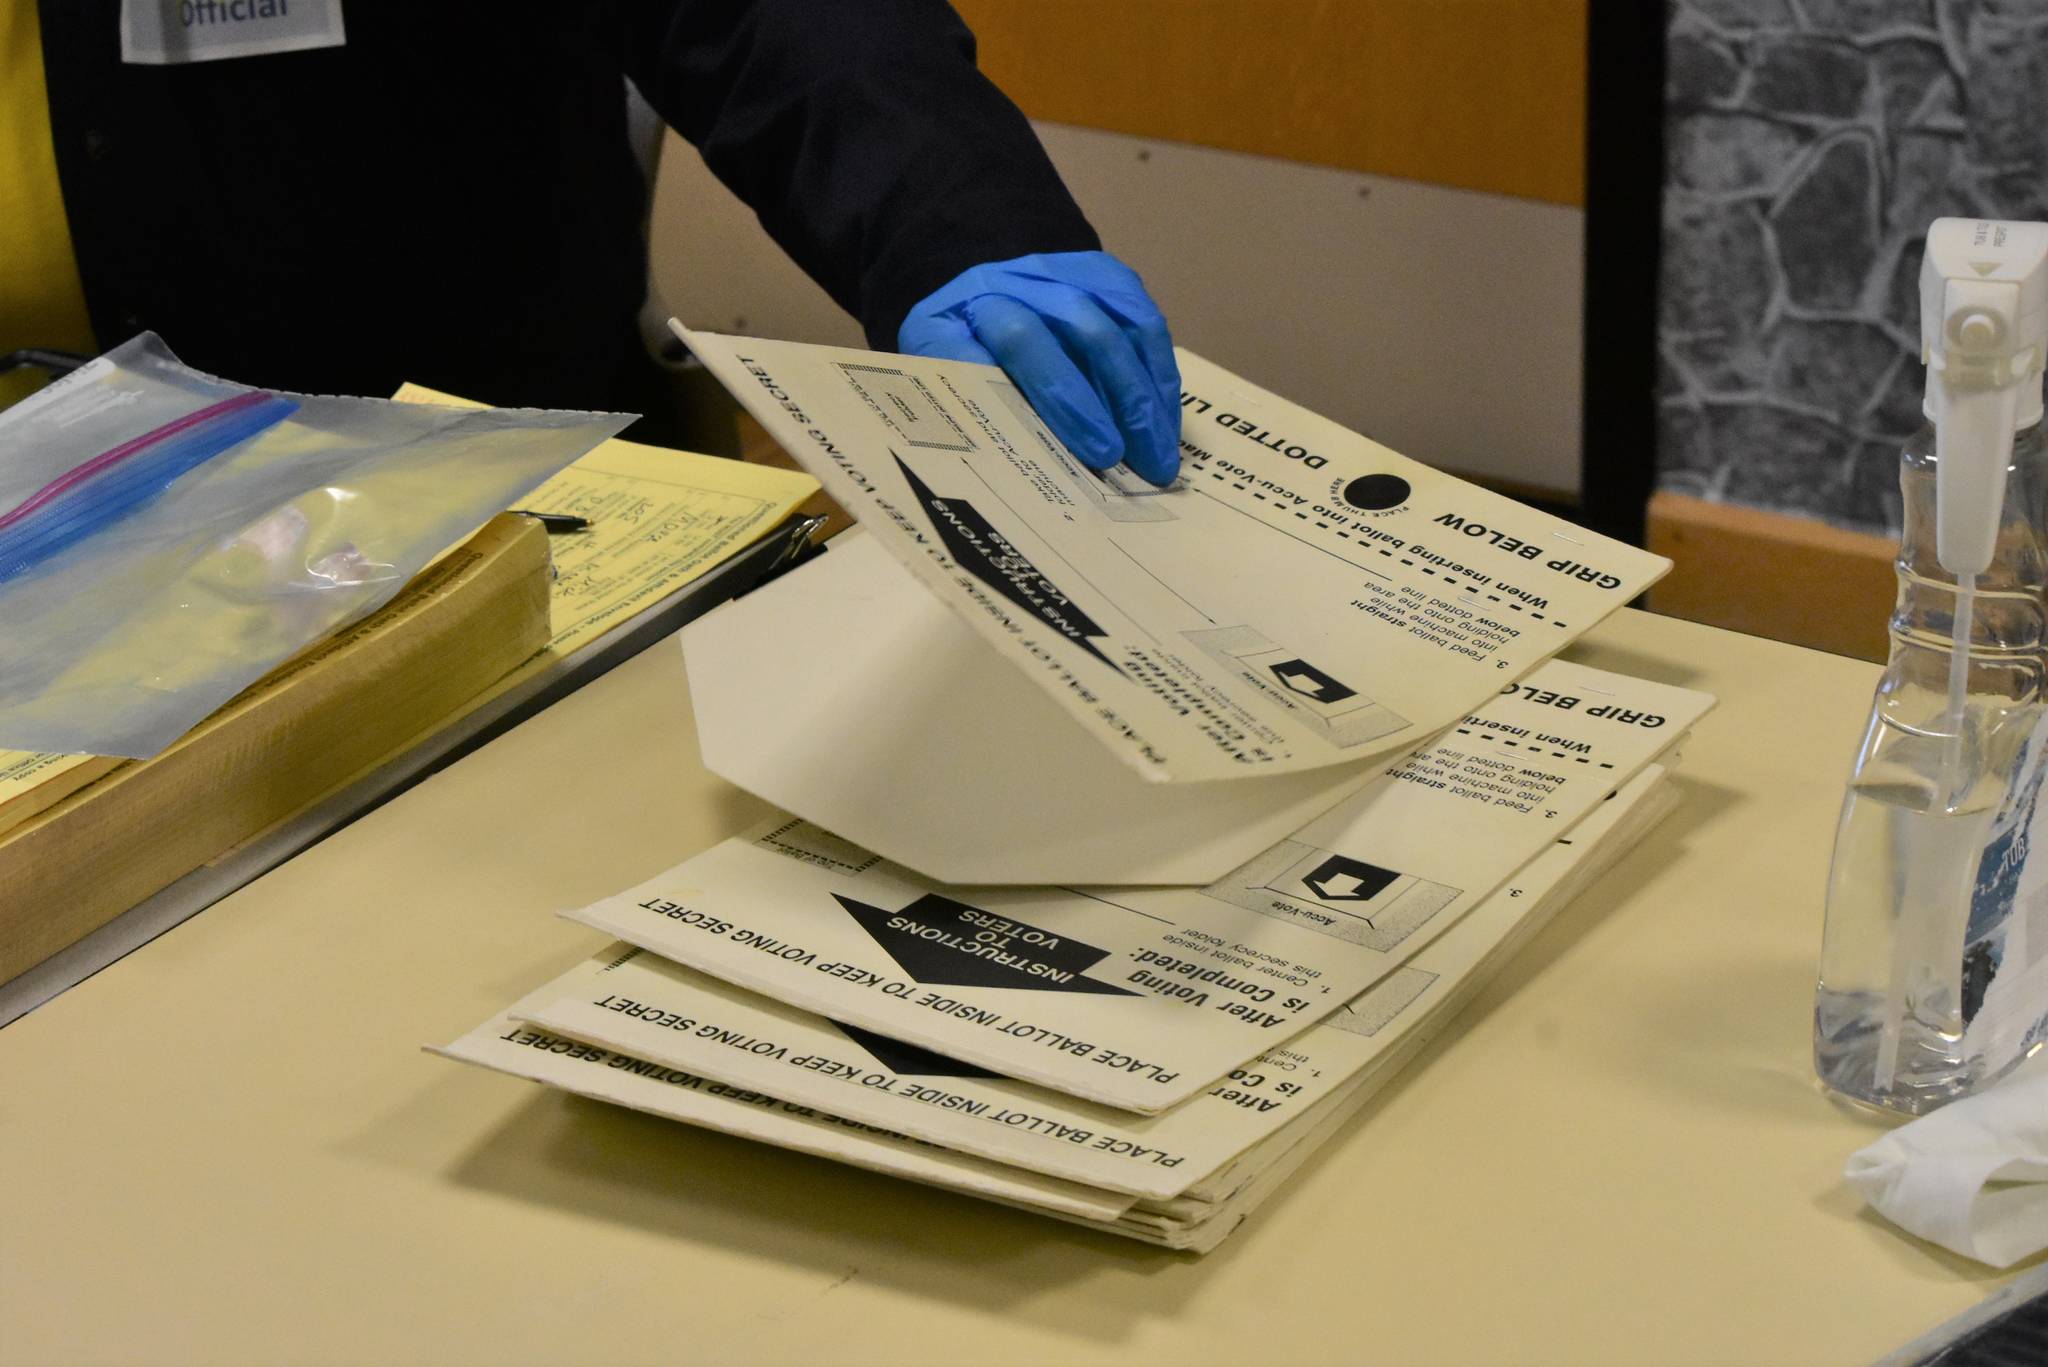 Poll workers at the Douglas Community Building show the coverings used to keep completed ballots covered and secret which this year are also being used to reduce contact with the ballot itself. The laminated coverings are sanitized after each use, part of the extra health precautions in place for the 2020 Primary Election on Tuesday, Aug. 18, 2020. (Peter Segall / Juneau Empire)